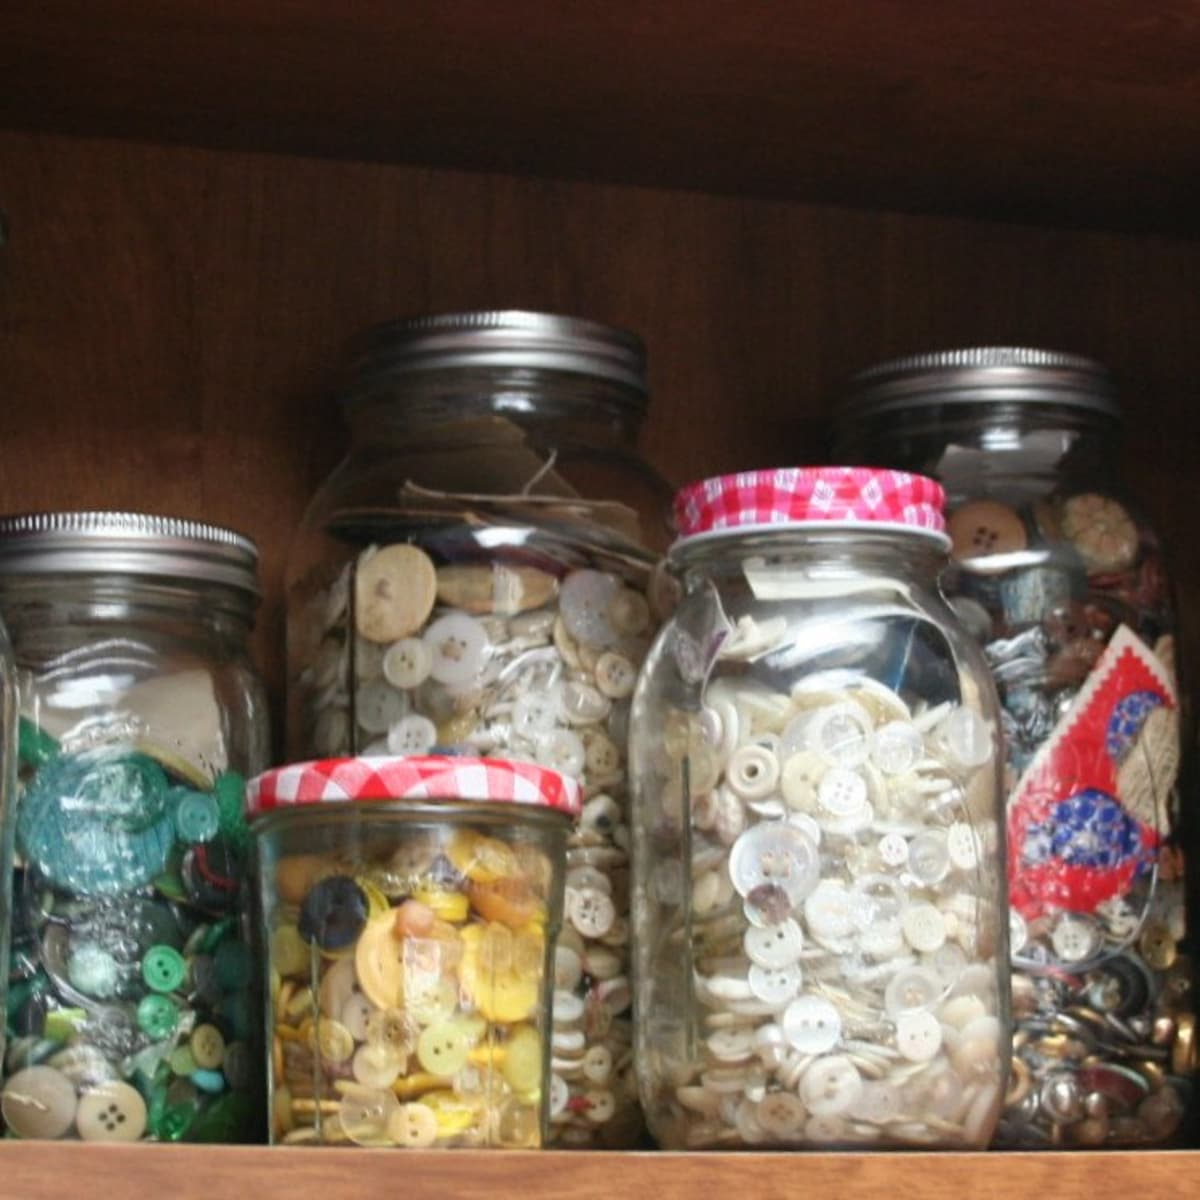 All About Collecting, Storing, and Cleaning Buttons - HobbyLark